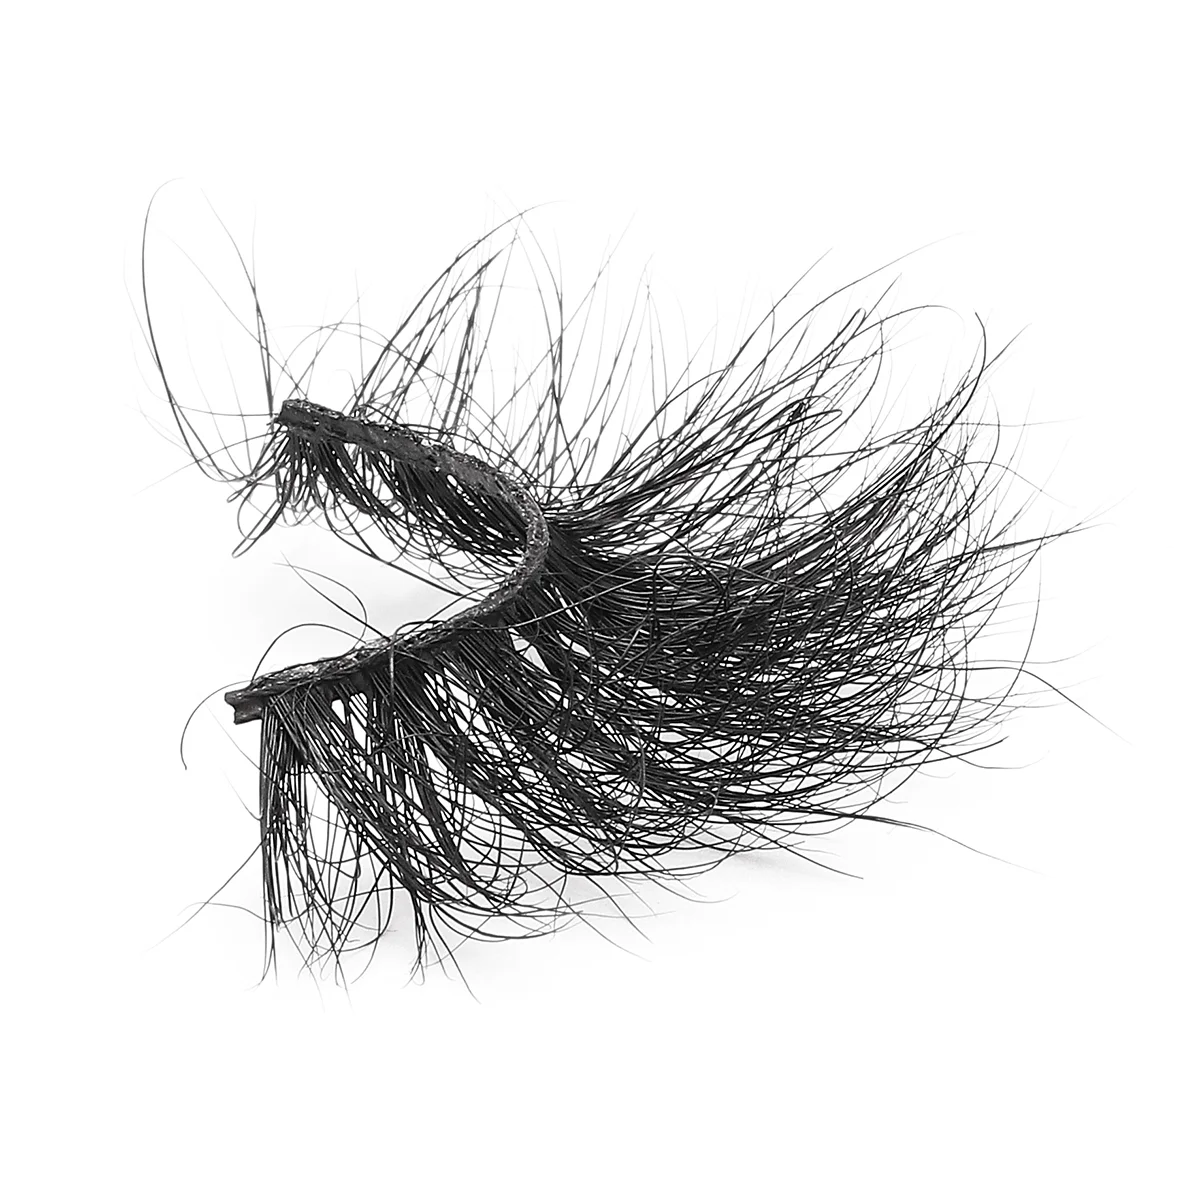 Inquiry for buying high quality 6D mink eyelash